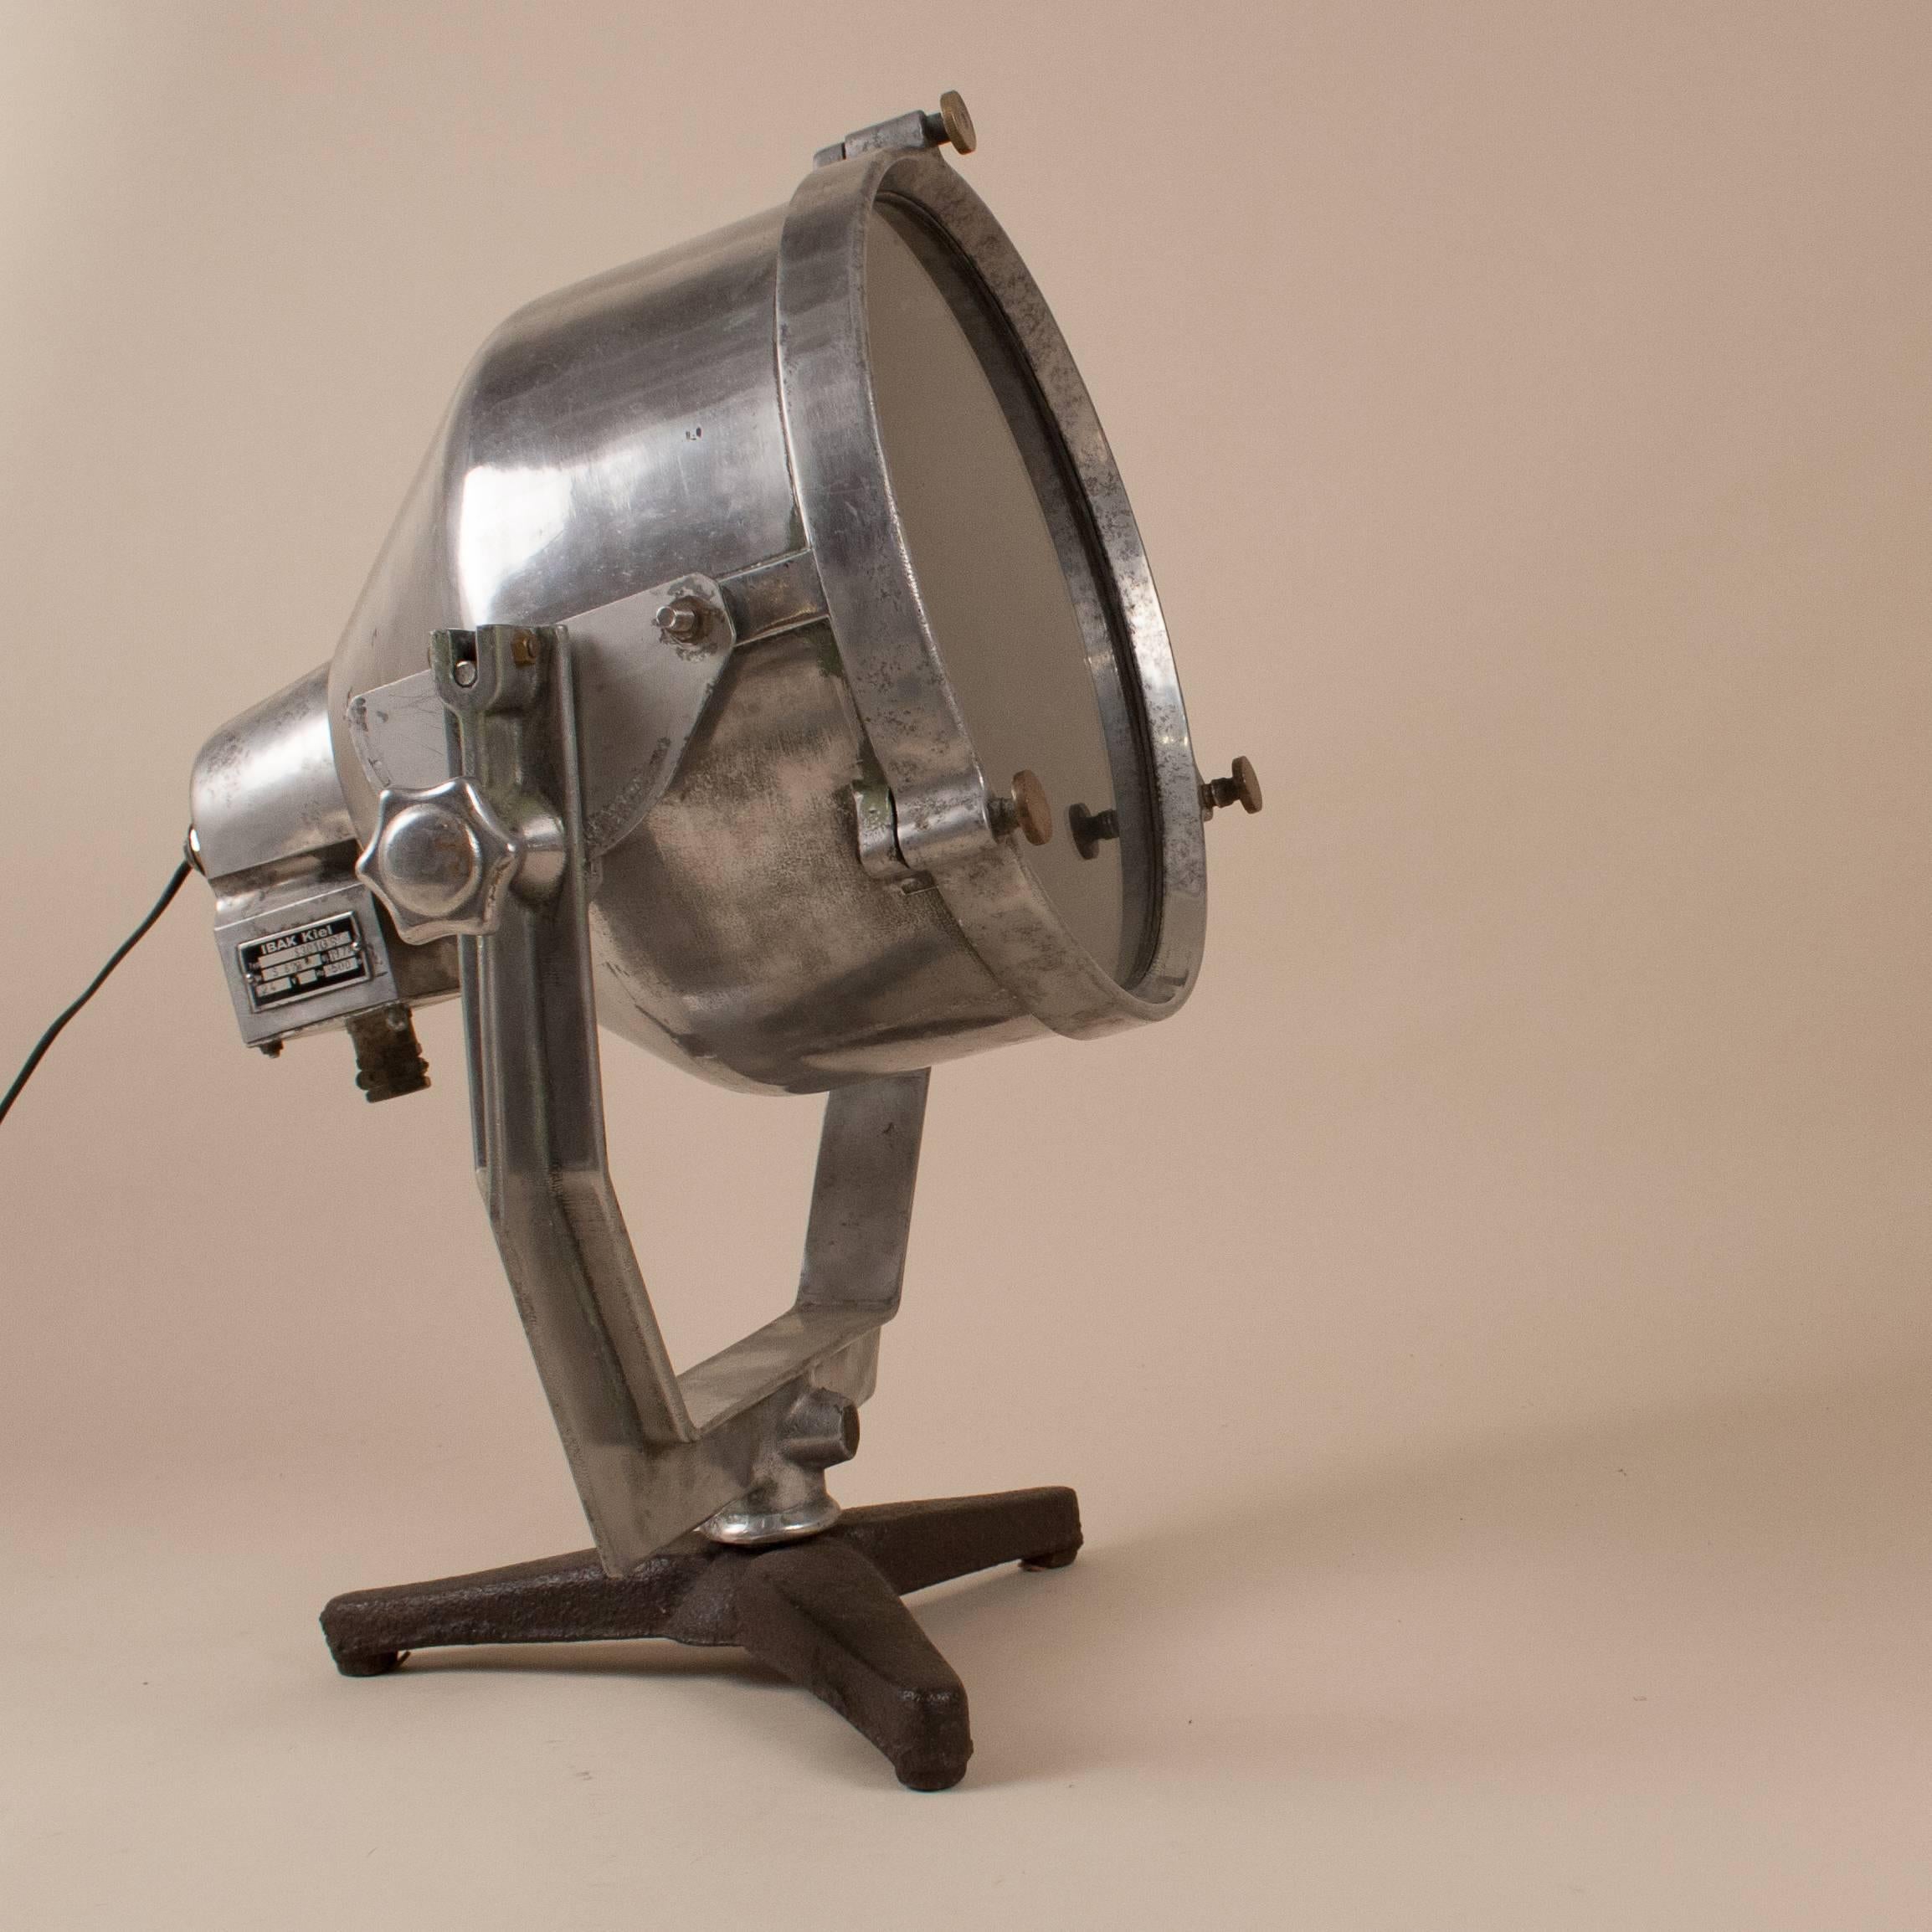 1977 aluminum maritime searchlight from IBAK Kiel of Germany, a leading manufacturer of navigational electronics. The spotlight light is mounted on an adjustable aluminum bracket and stands on a black iron base. It has its original plaque with